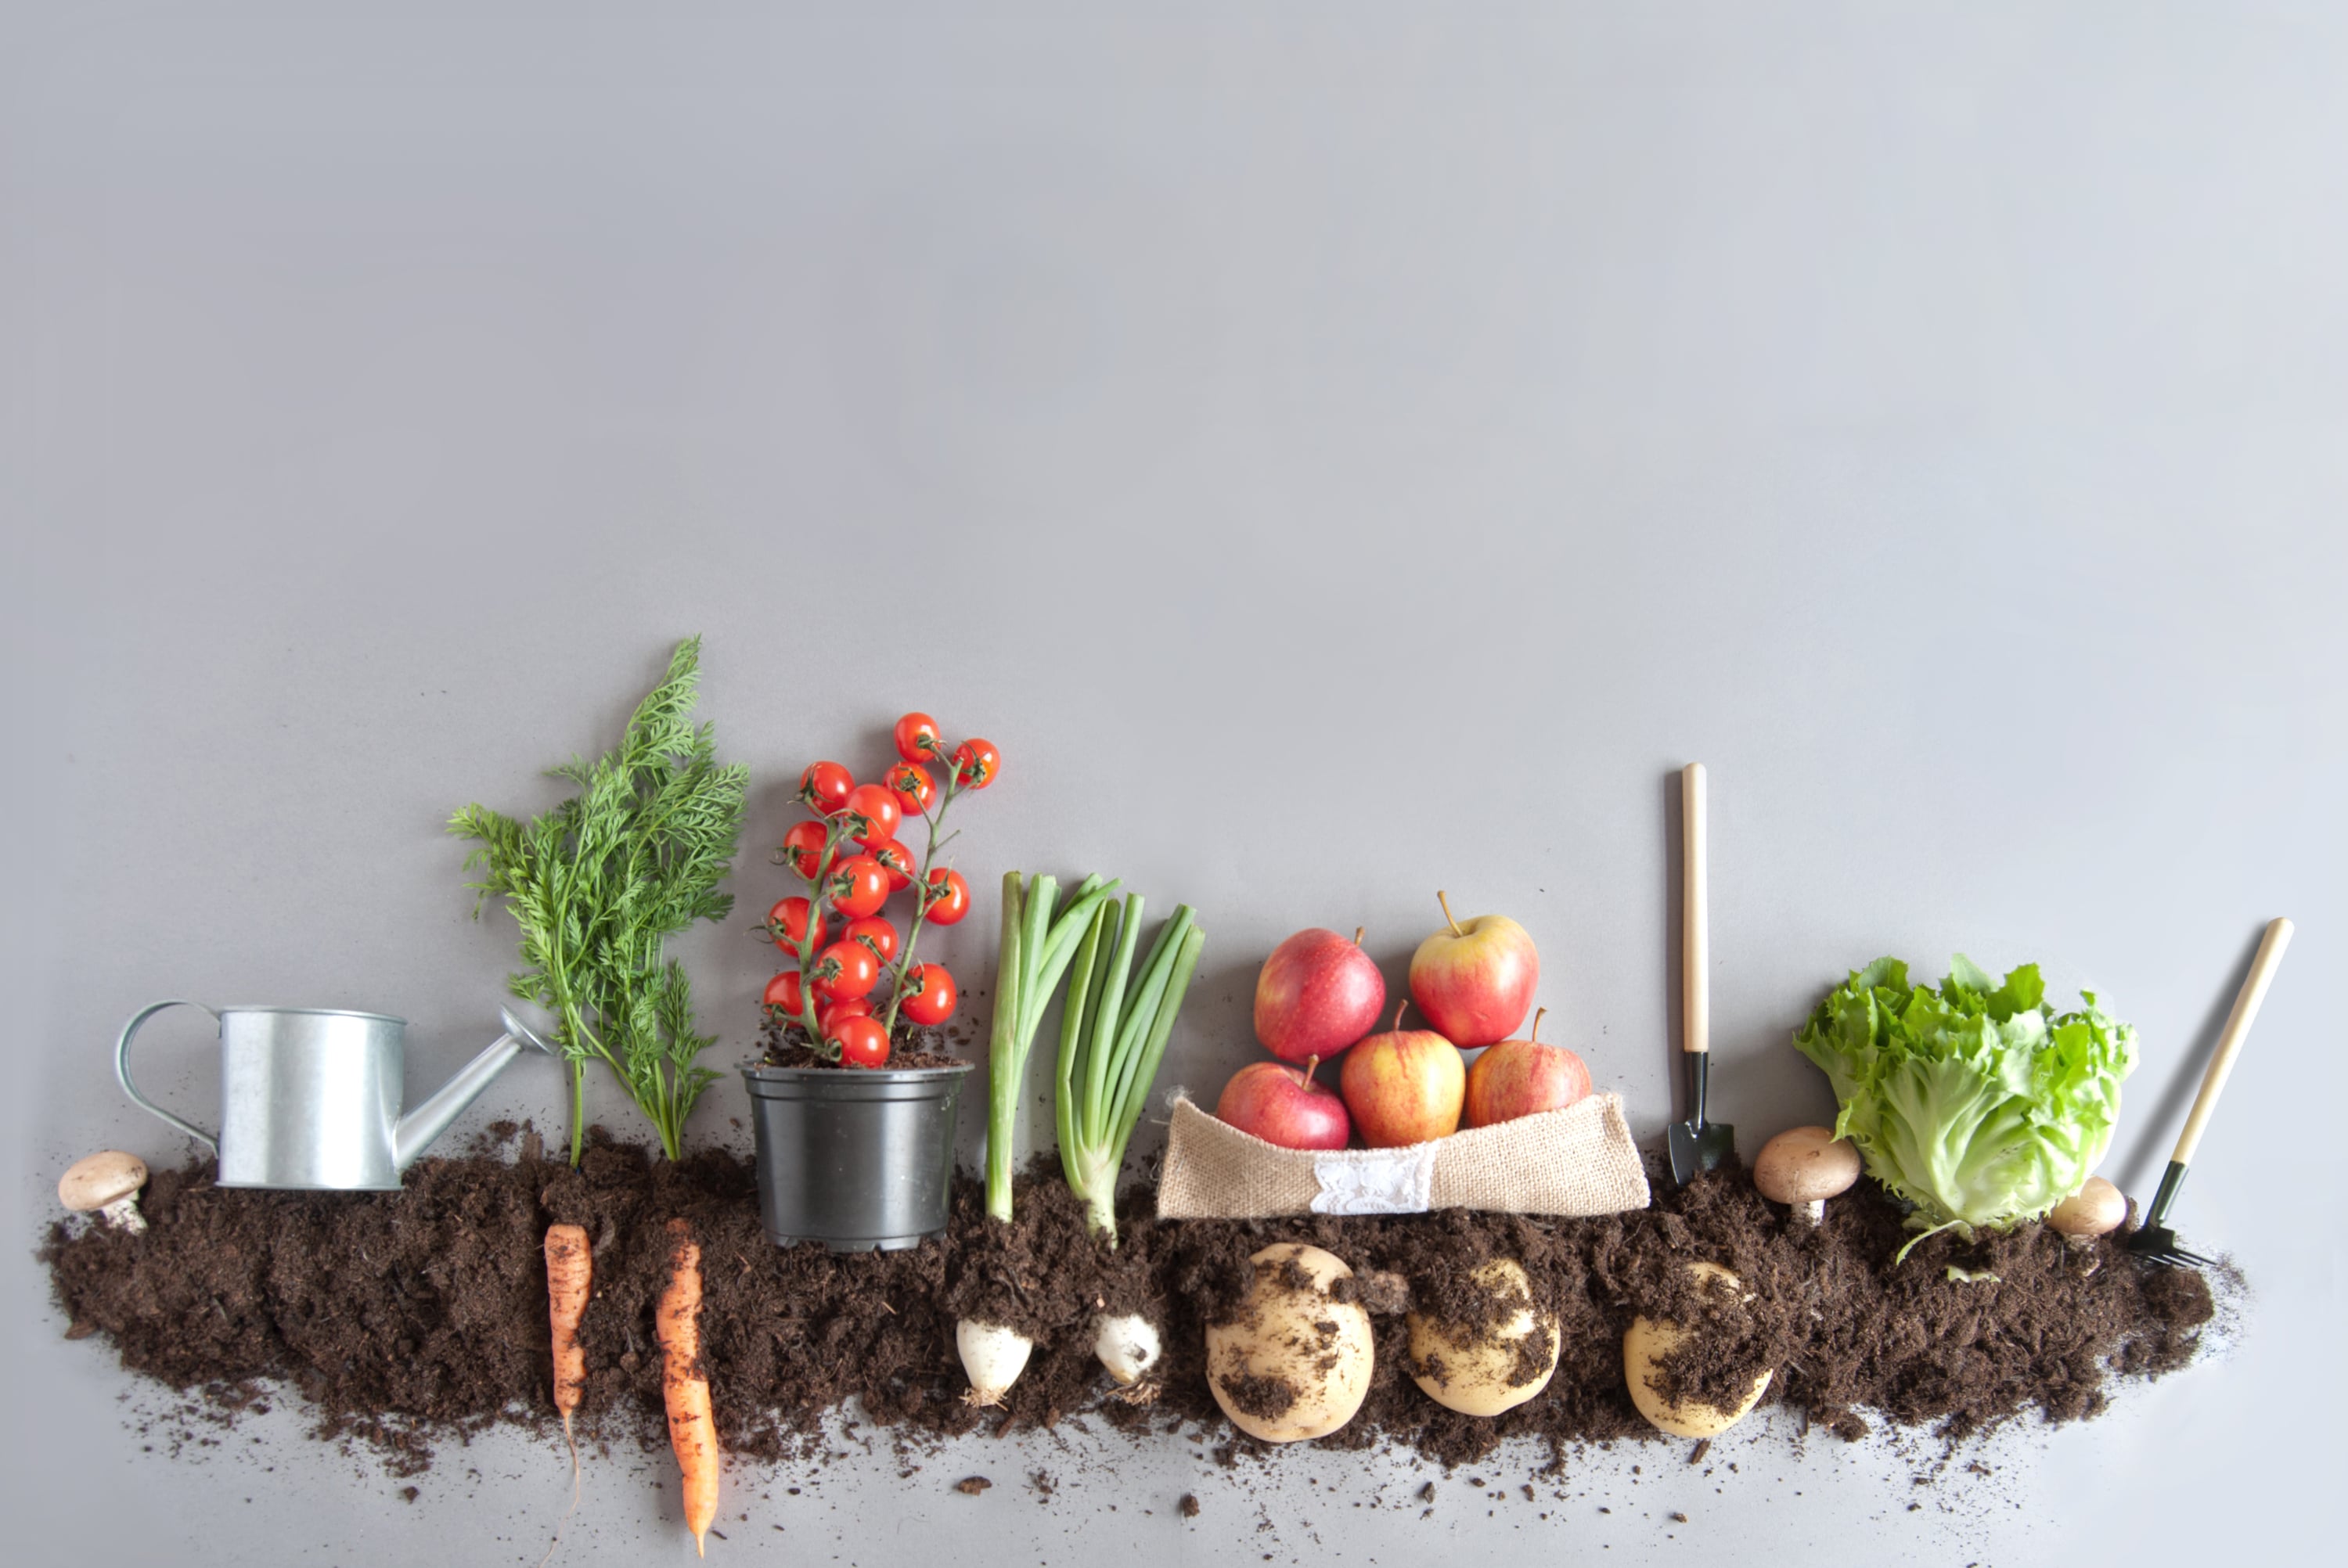 How to compost at home: Rich soil for gardening